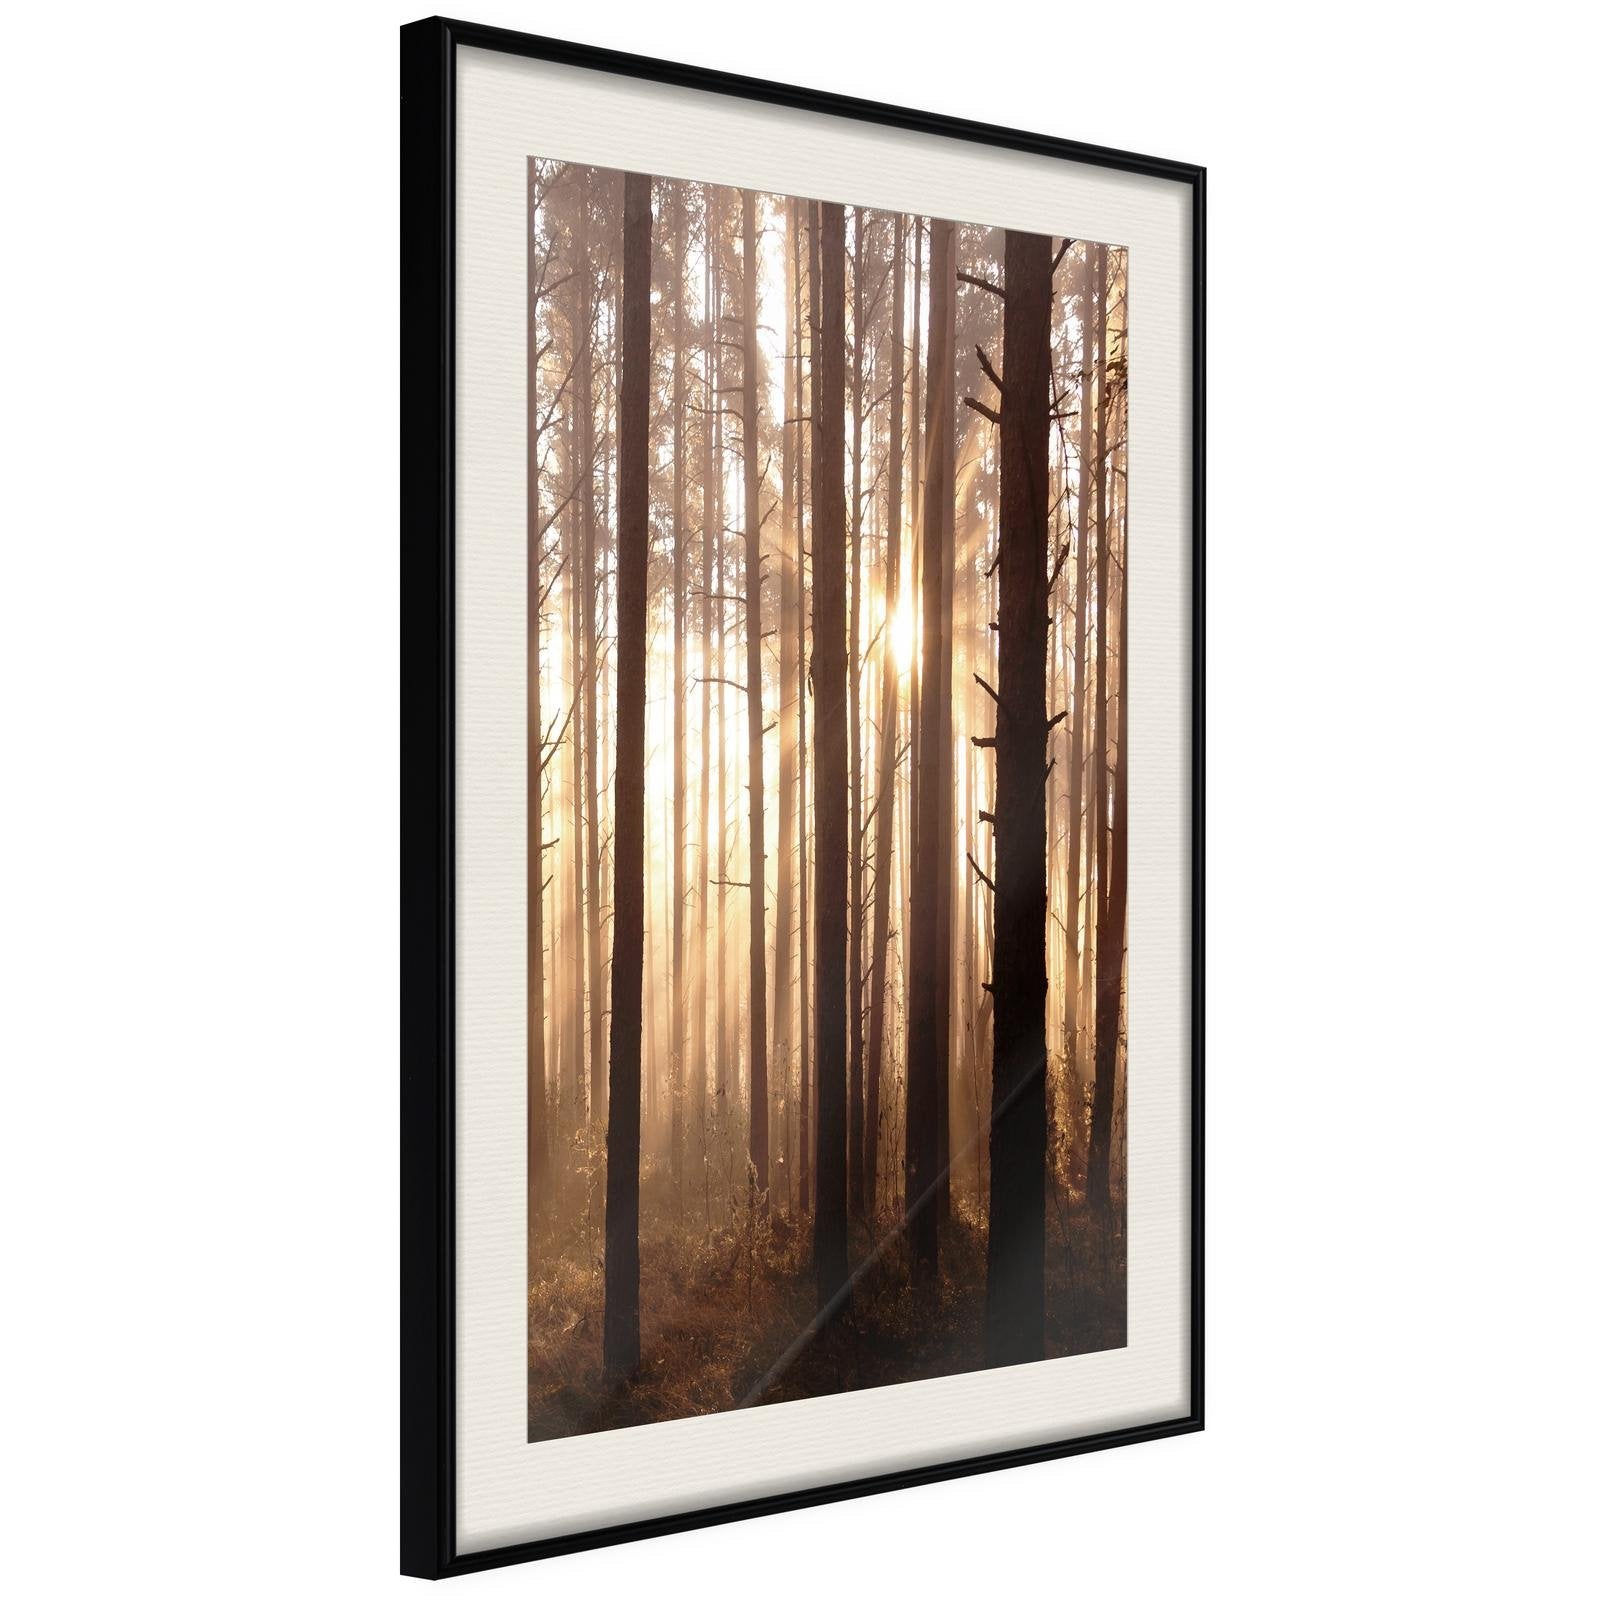 Inramad Poster / Tavla - Morning in the Forest-Poster Inramad-Artgeist-20x30-Svart ram med passepartout-peaceofhome.se